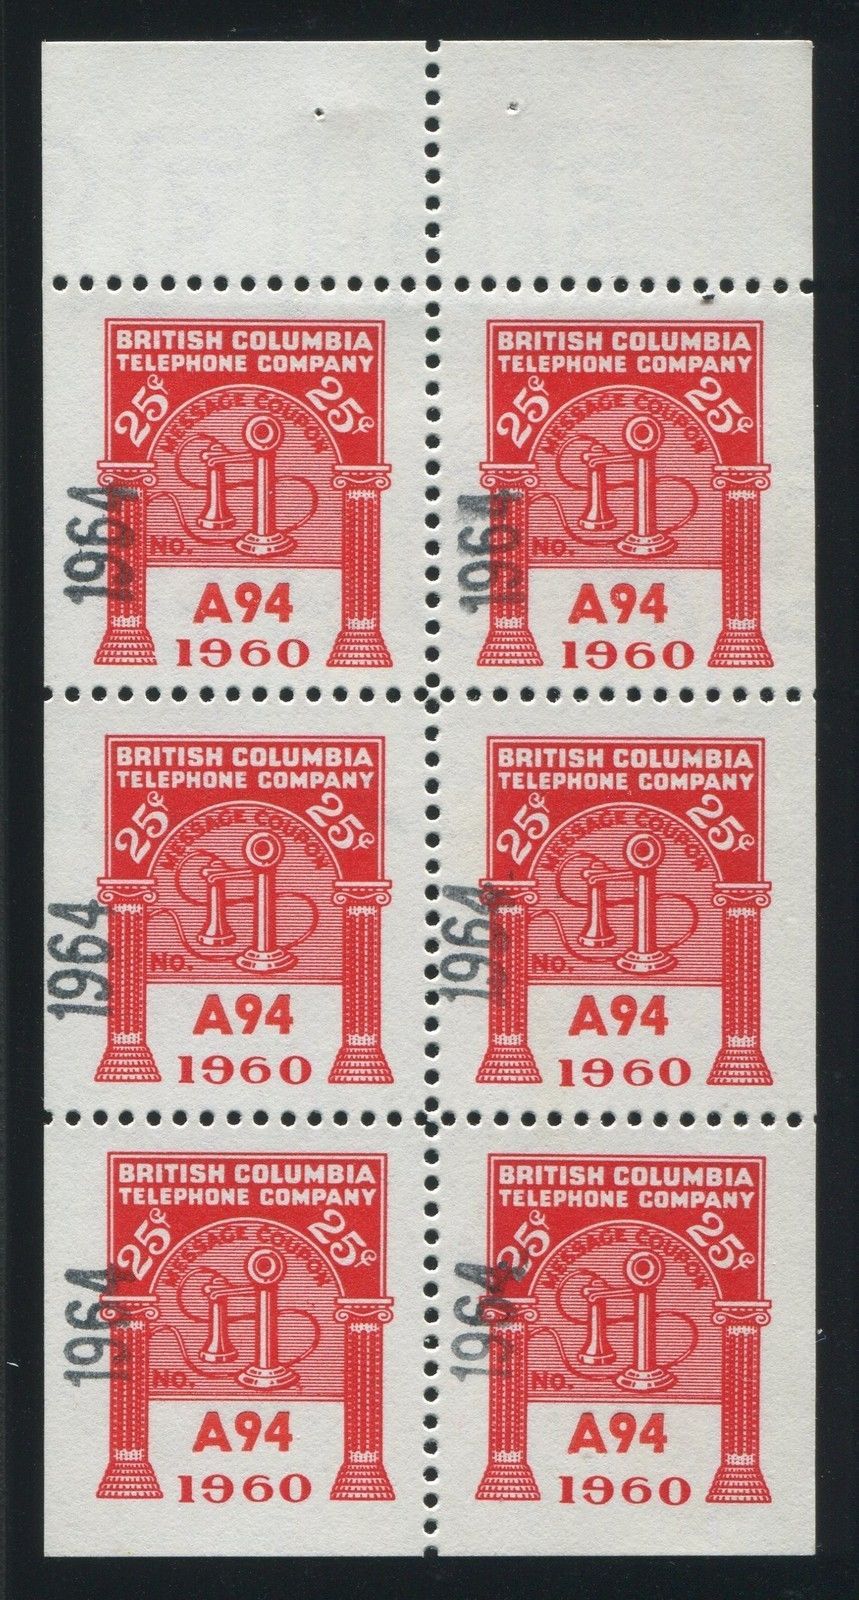 0301BC1709 - BCT203 - Mint Booklet Pane, Watermarked